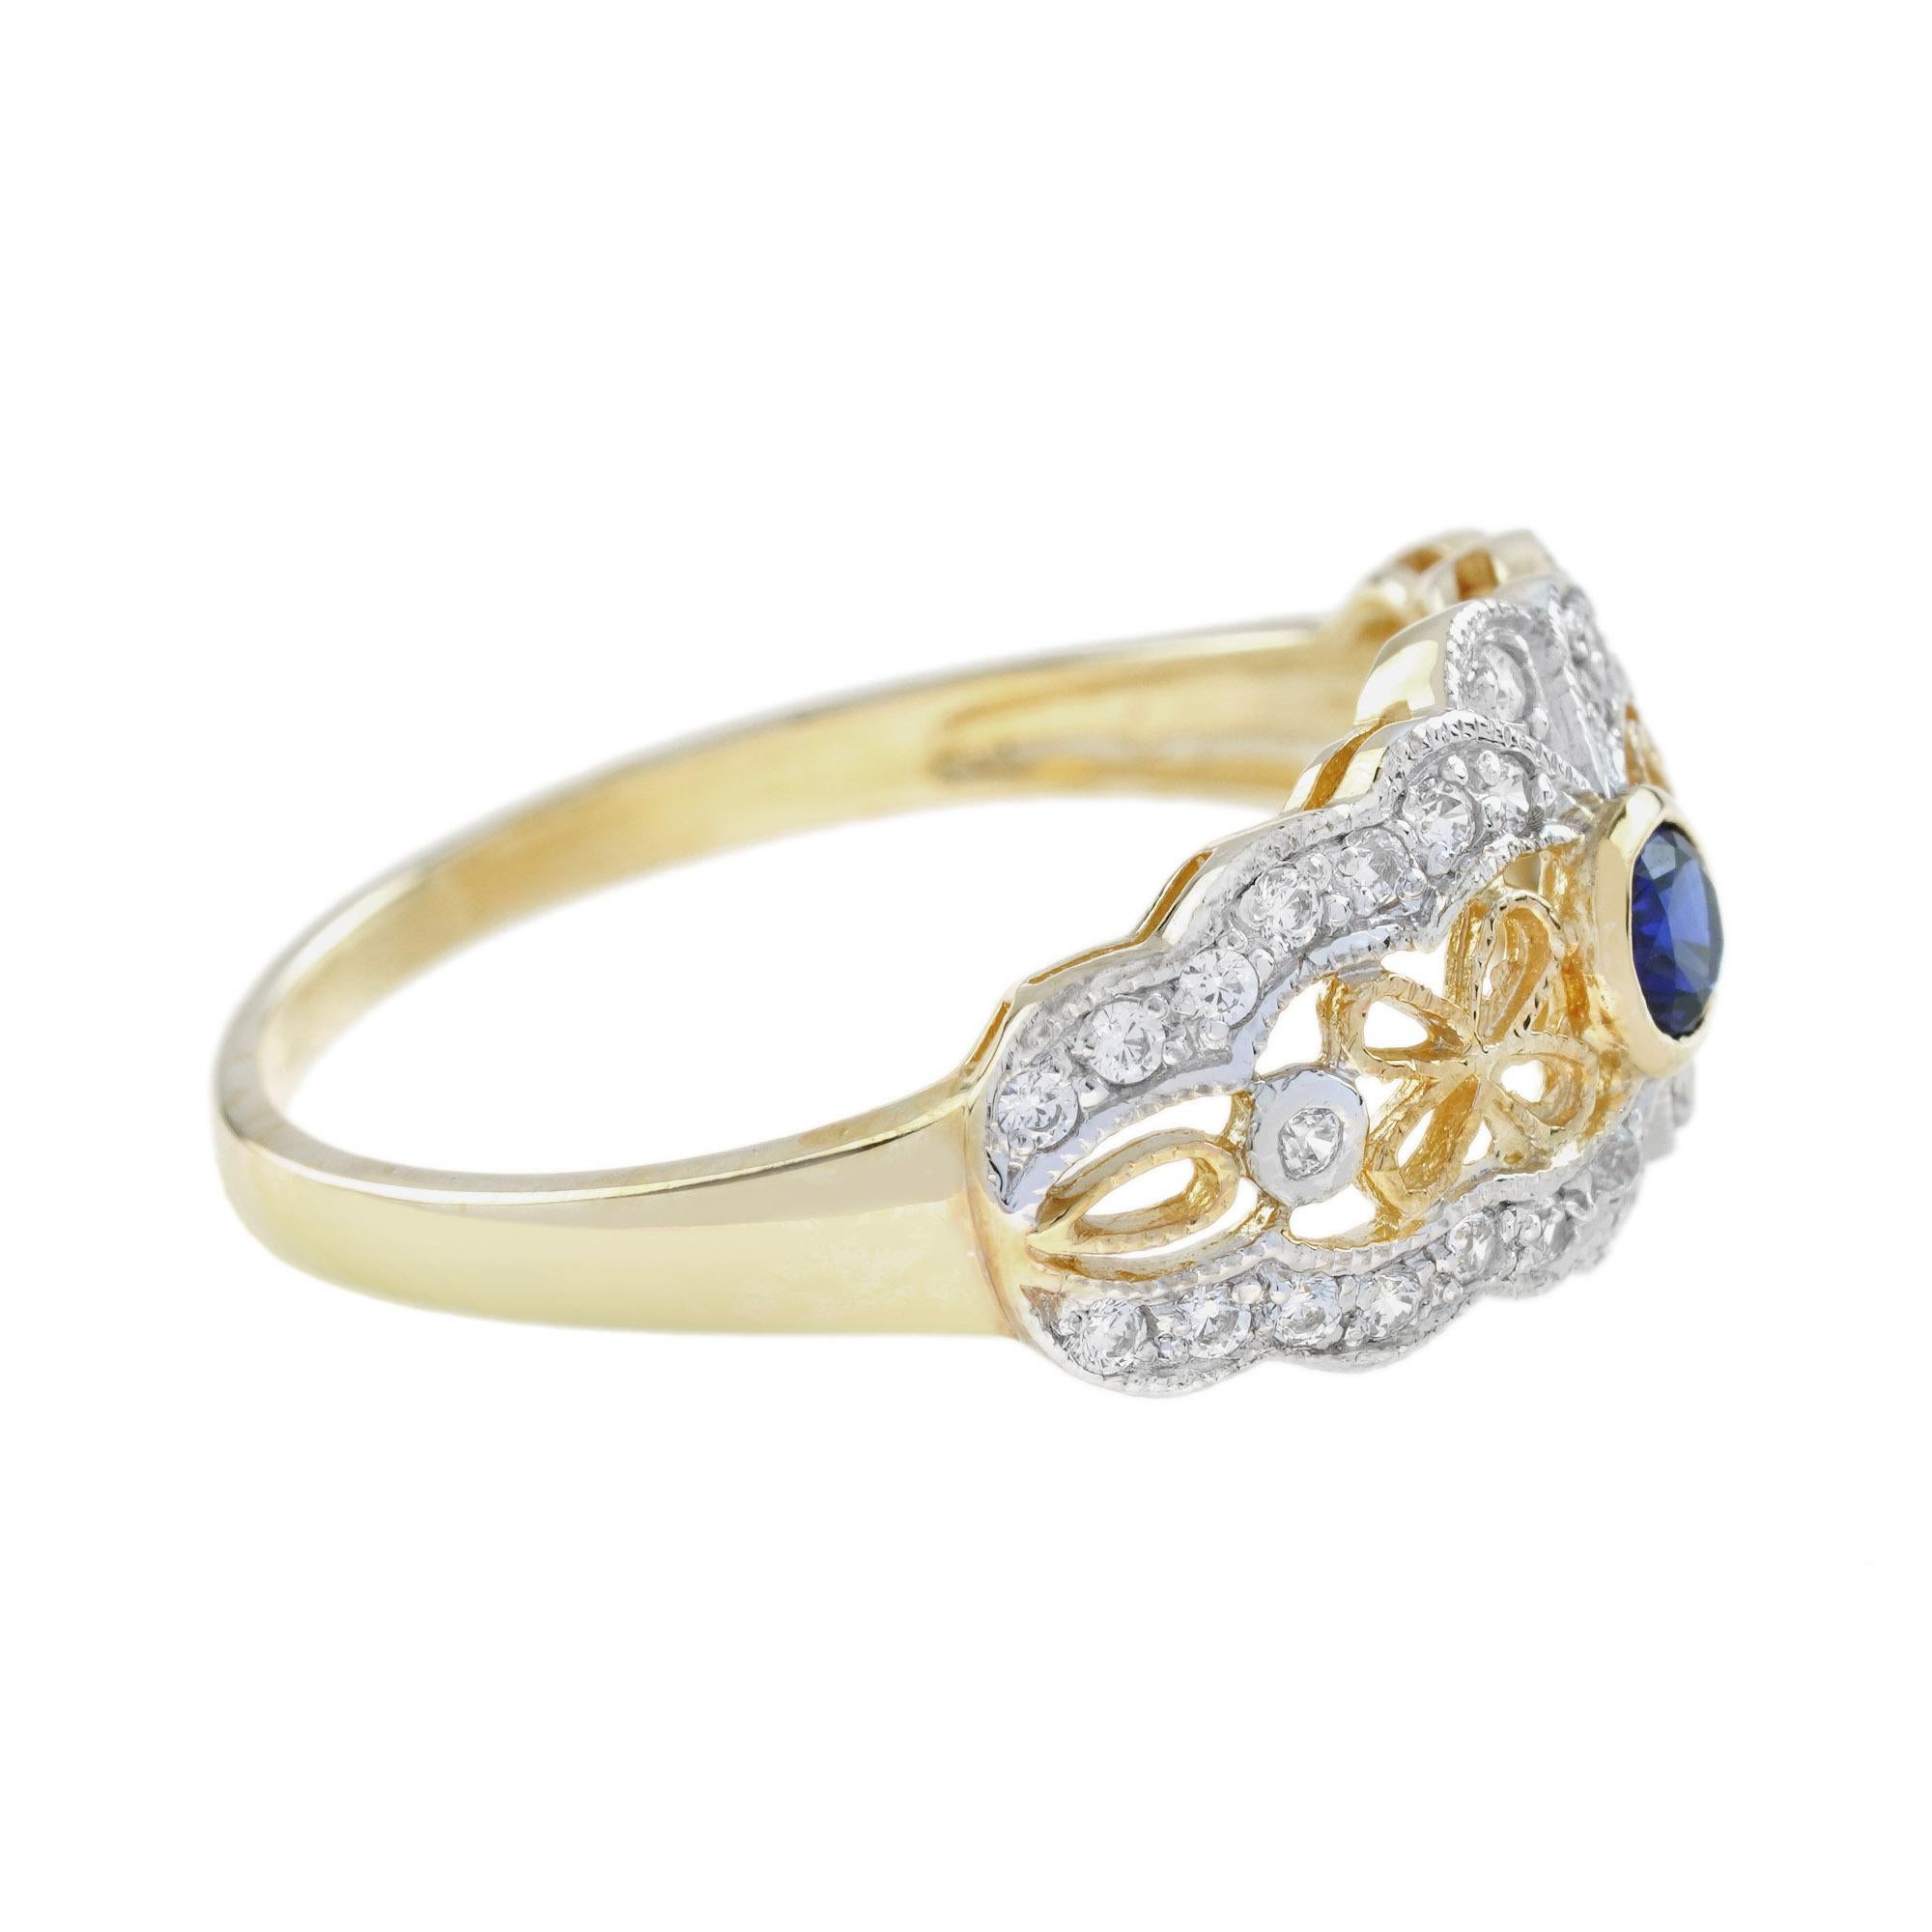 For Sale:  Blue Sapphire and Diamond Vintage Style Filigree Ring in 14K Two Tone Gold 4